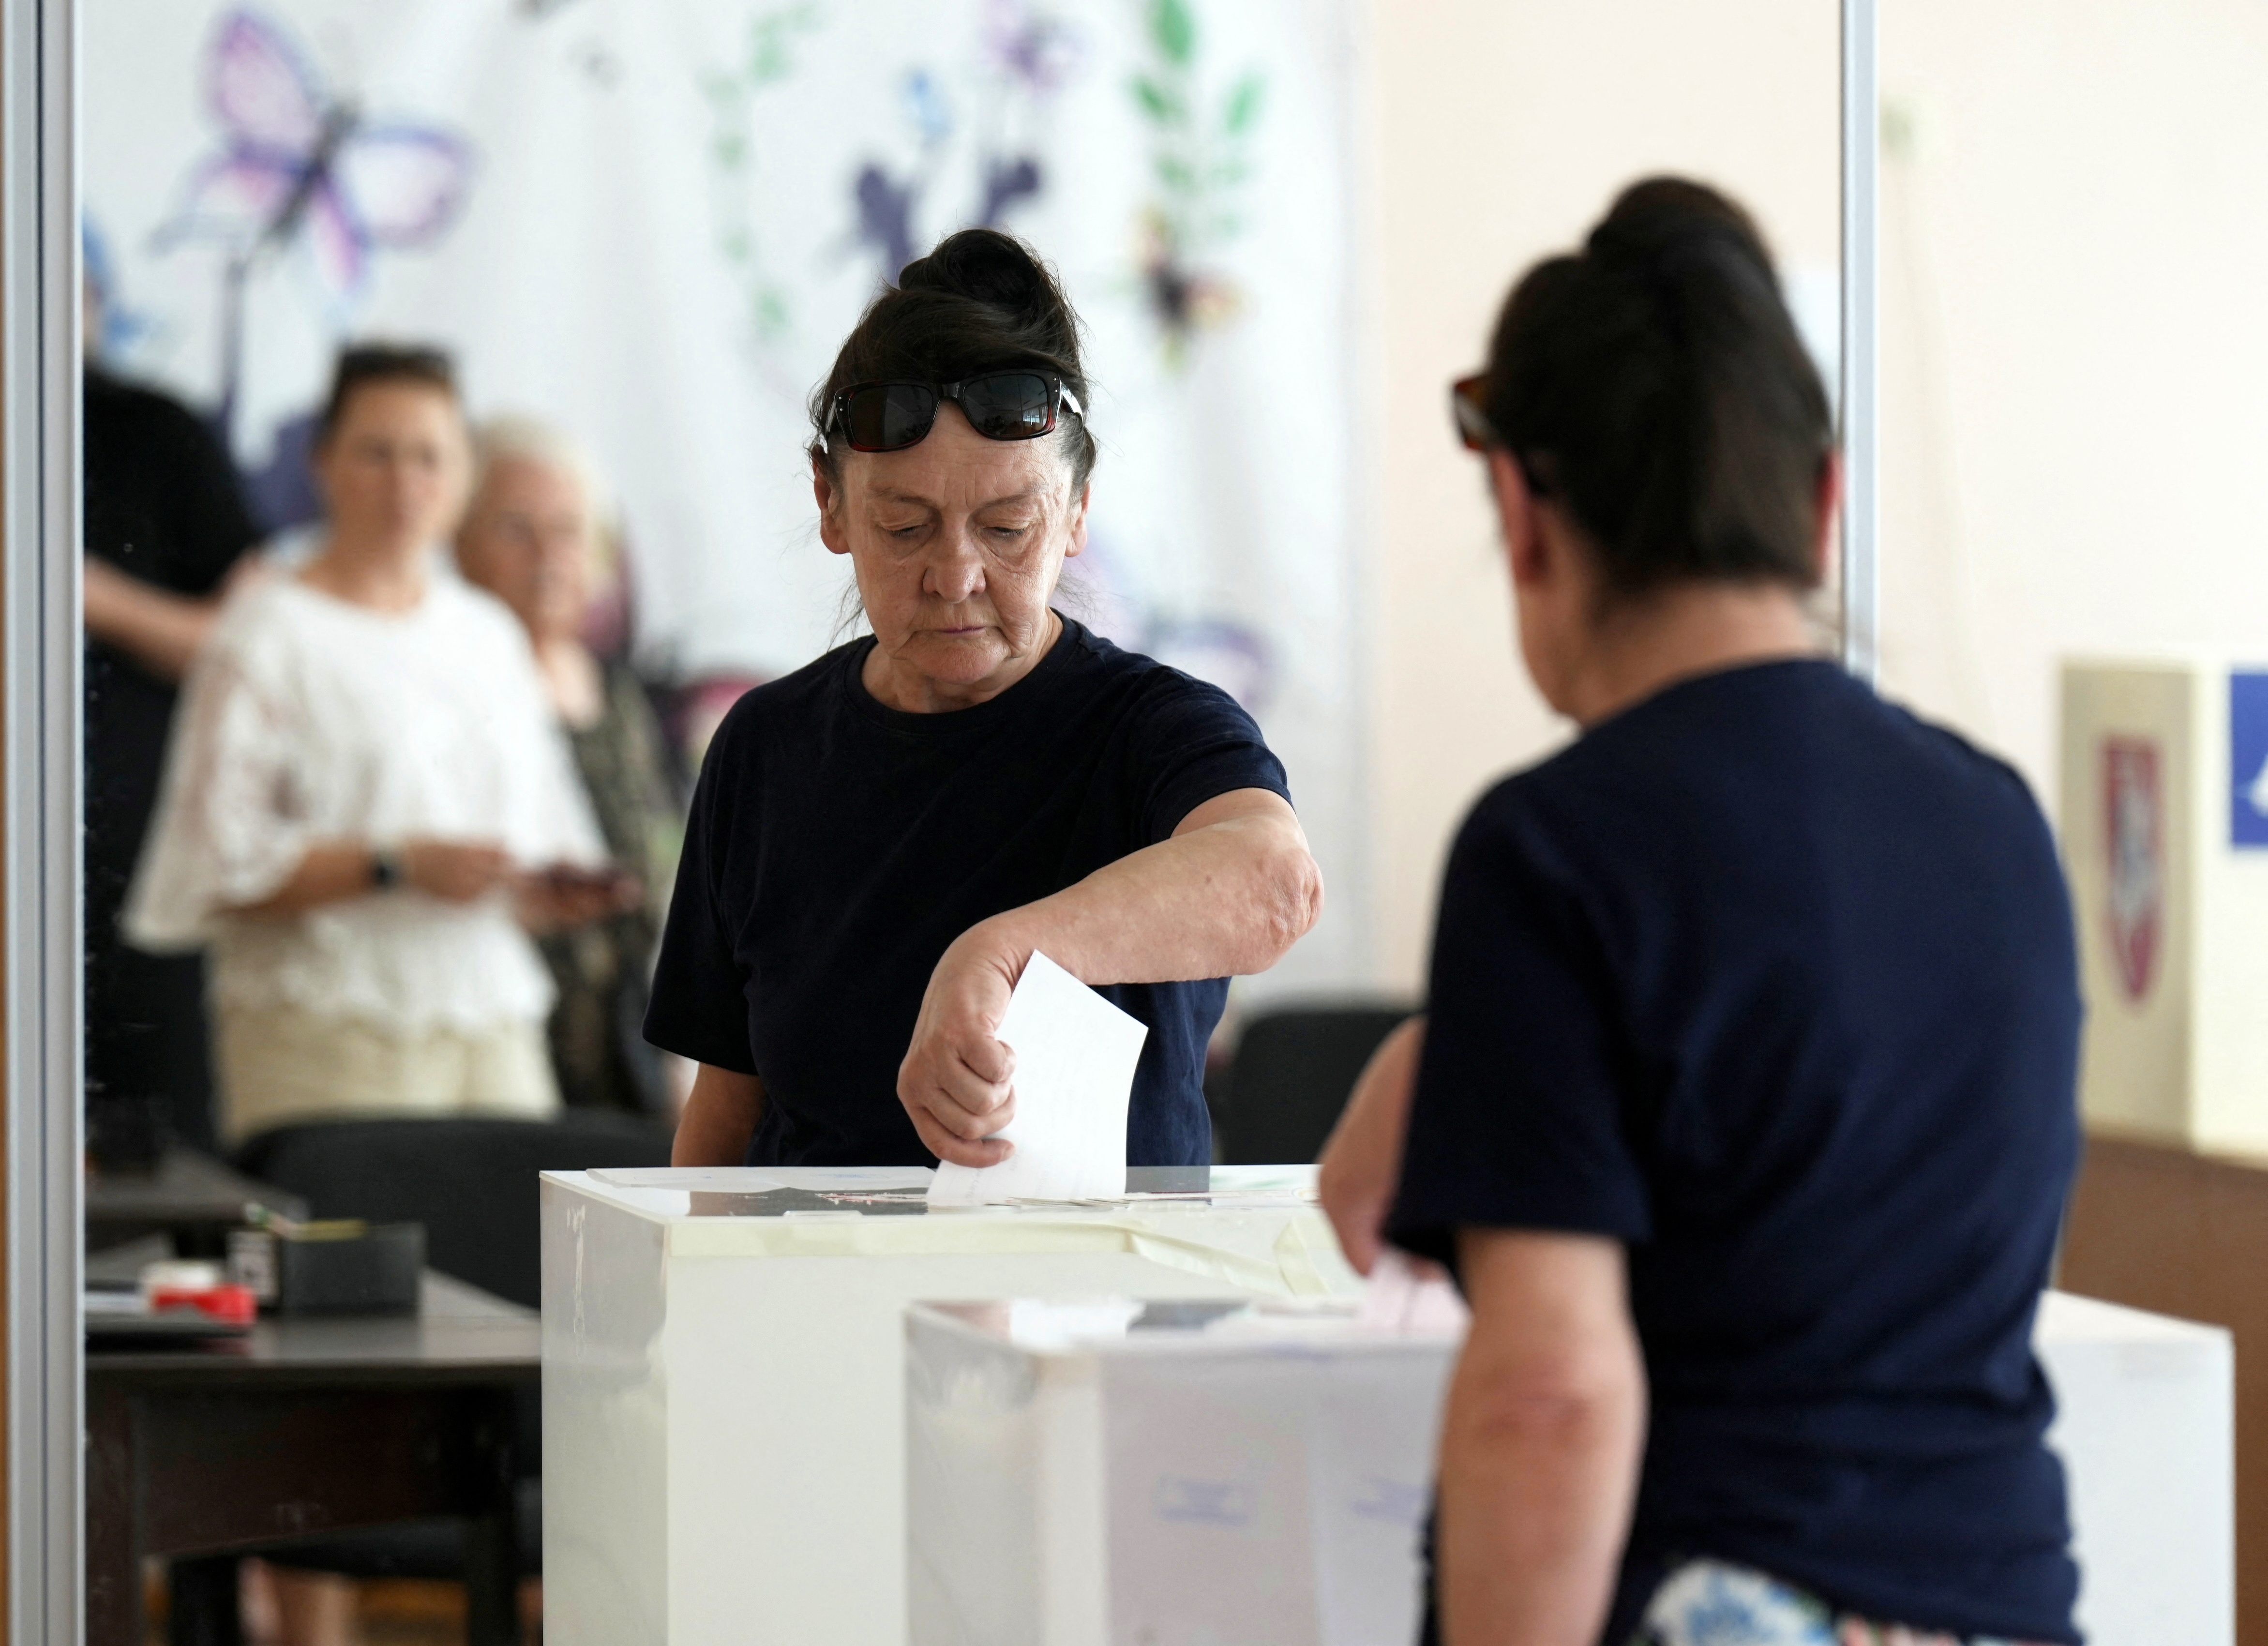 Lithuania holds second round of presidential election